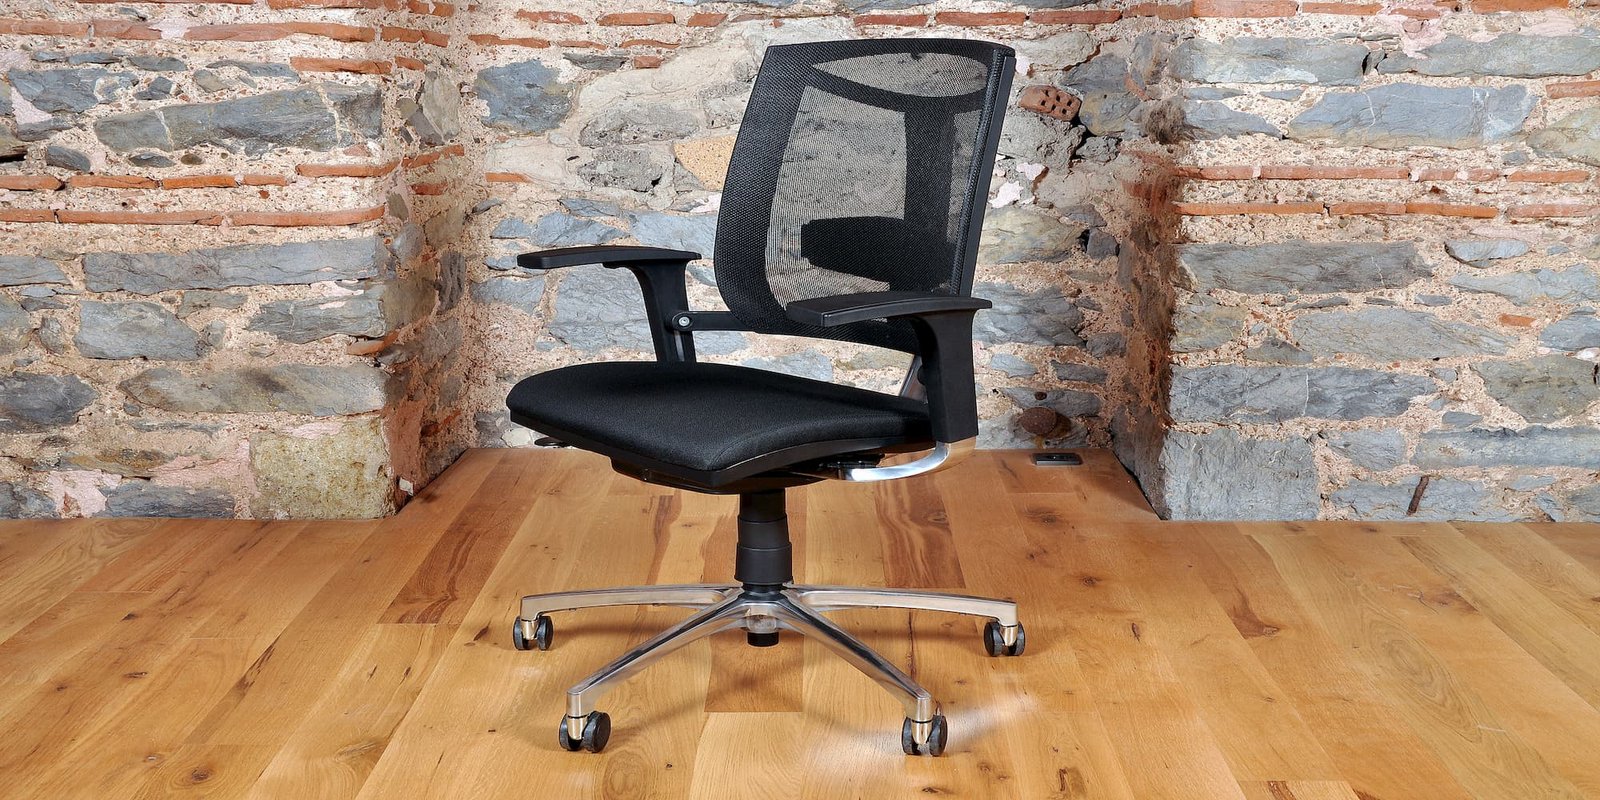 12 Best & Cheap Office Chairs in Singapore From $49 (2020)